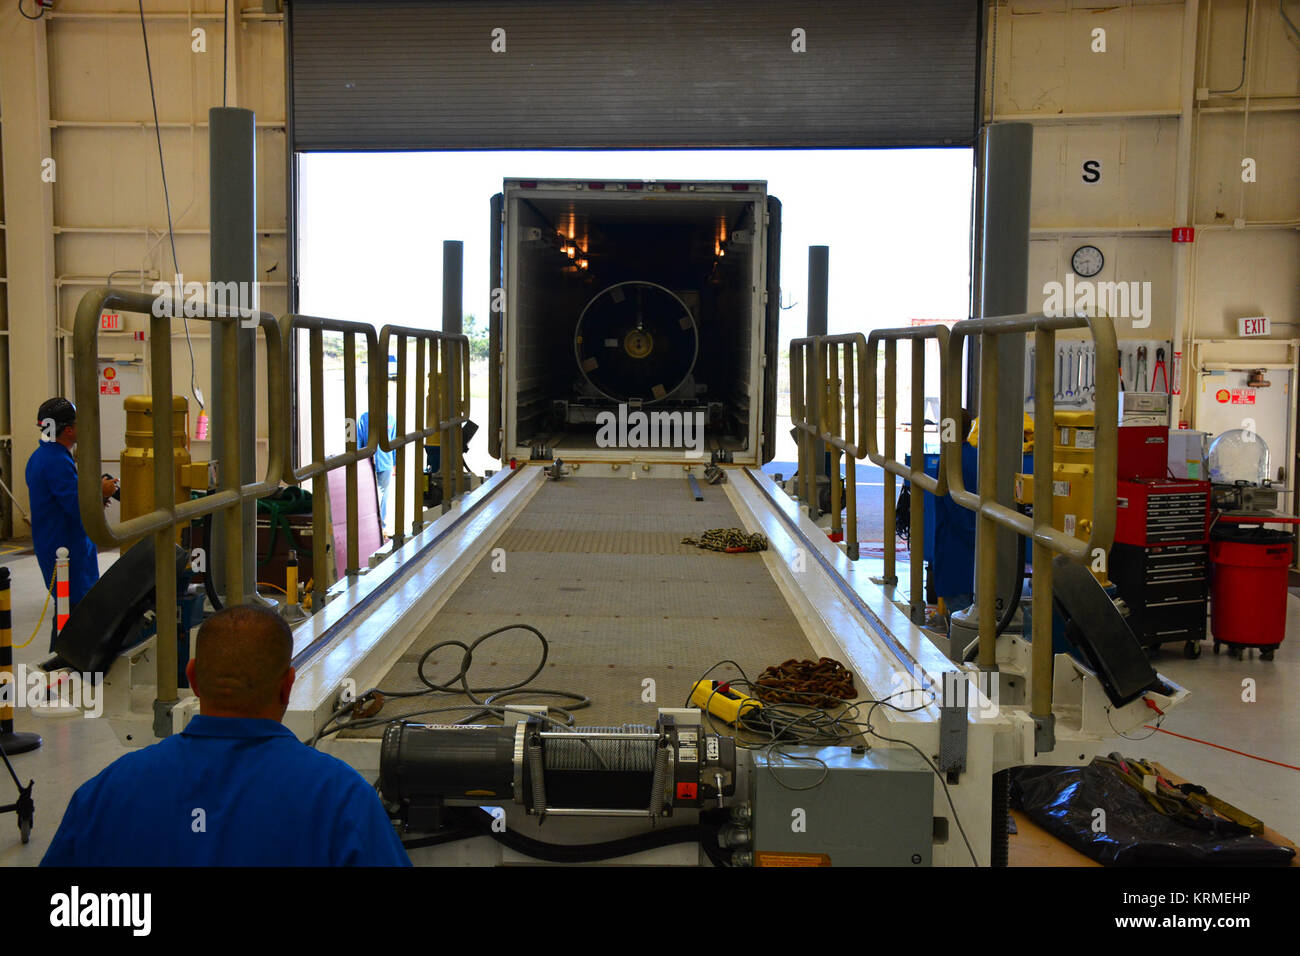 Inside Building 1555 at Vandenberg Air Force Base in California, technicians and engineers offload the first stage motor for the Orbital ATK Pegasus XL rocket which will launch eight NASA Cyclone Global Navigation Satellite System, or CYGNSS, spacecraft. When preparations are completed at Vandenberg, the rocket, with CYGNSS in its payload fairing, will be attached to the Orbital ATK L-1011 carrier aircraft and transported to NASA’s Kennedy Space Center in Florida. On Dec. 12, 2016, the carrier aircraft is scheduled to take off from the Skid Strip at Cape Canaveral Air Force Station and CYGNSS  Stock Photo